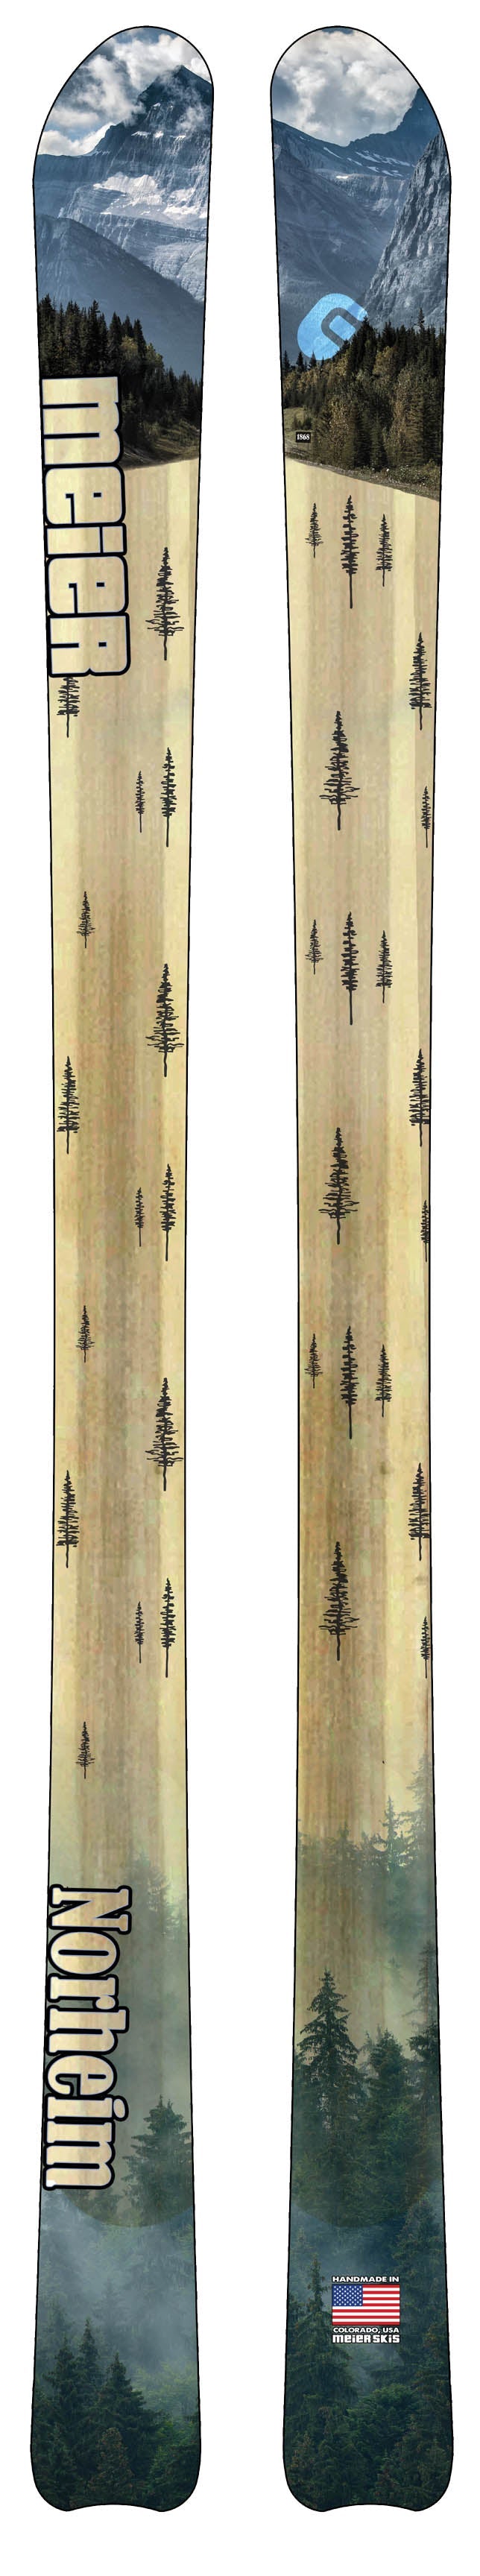 Telemark skis with the words Meier and Norhiem on them and a mountain tree design.